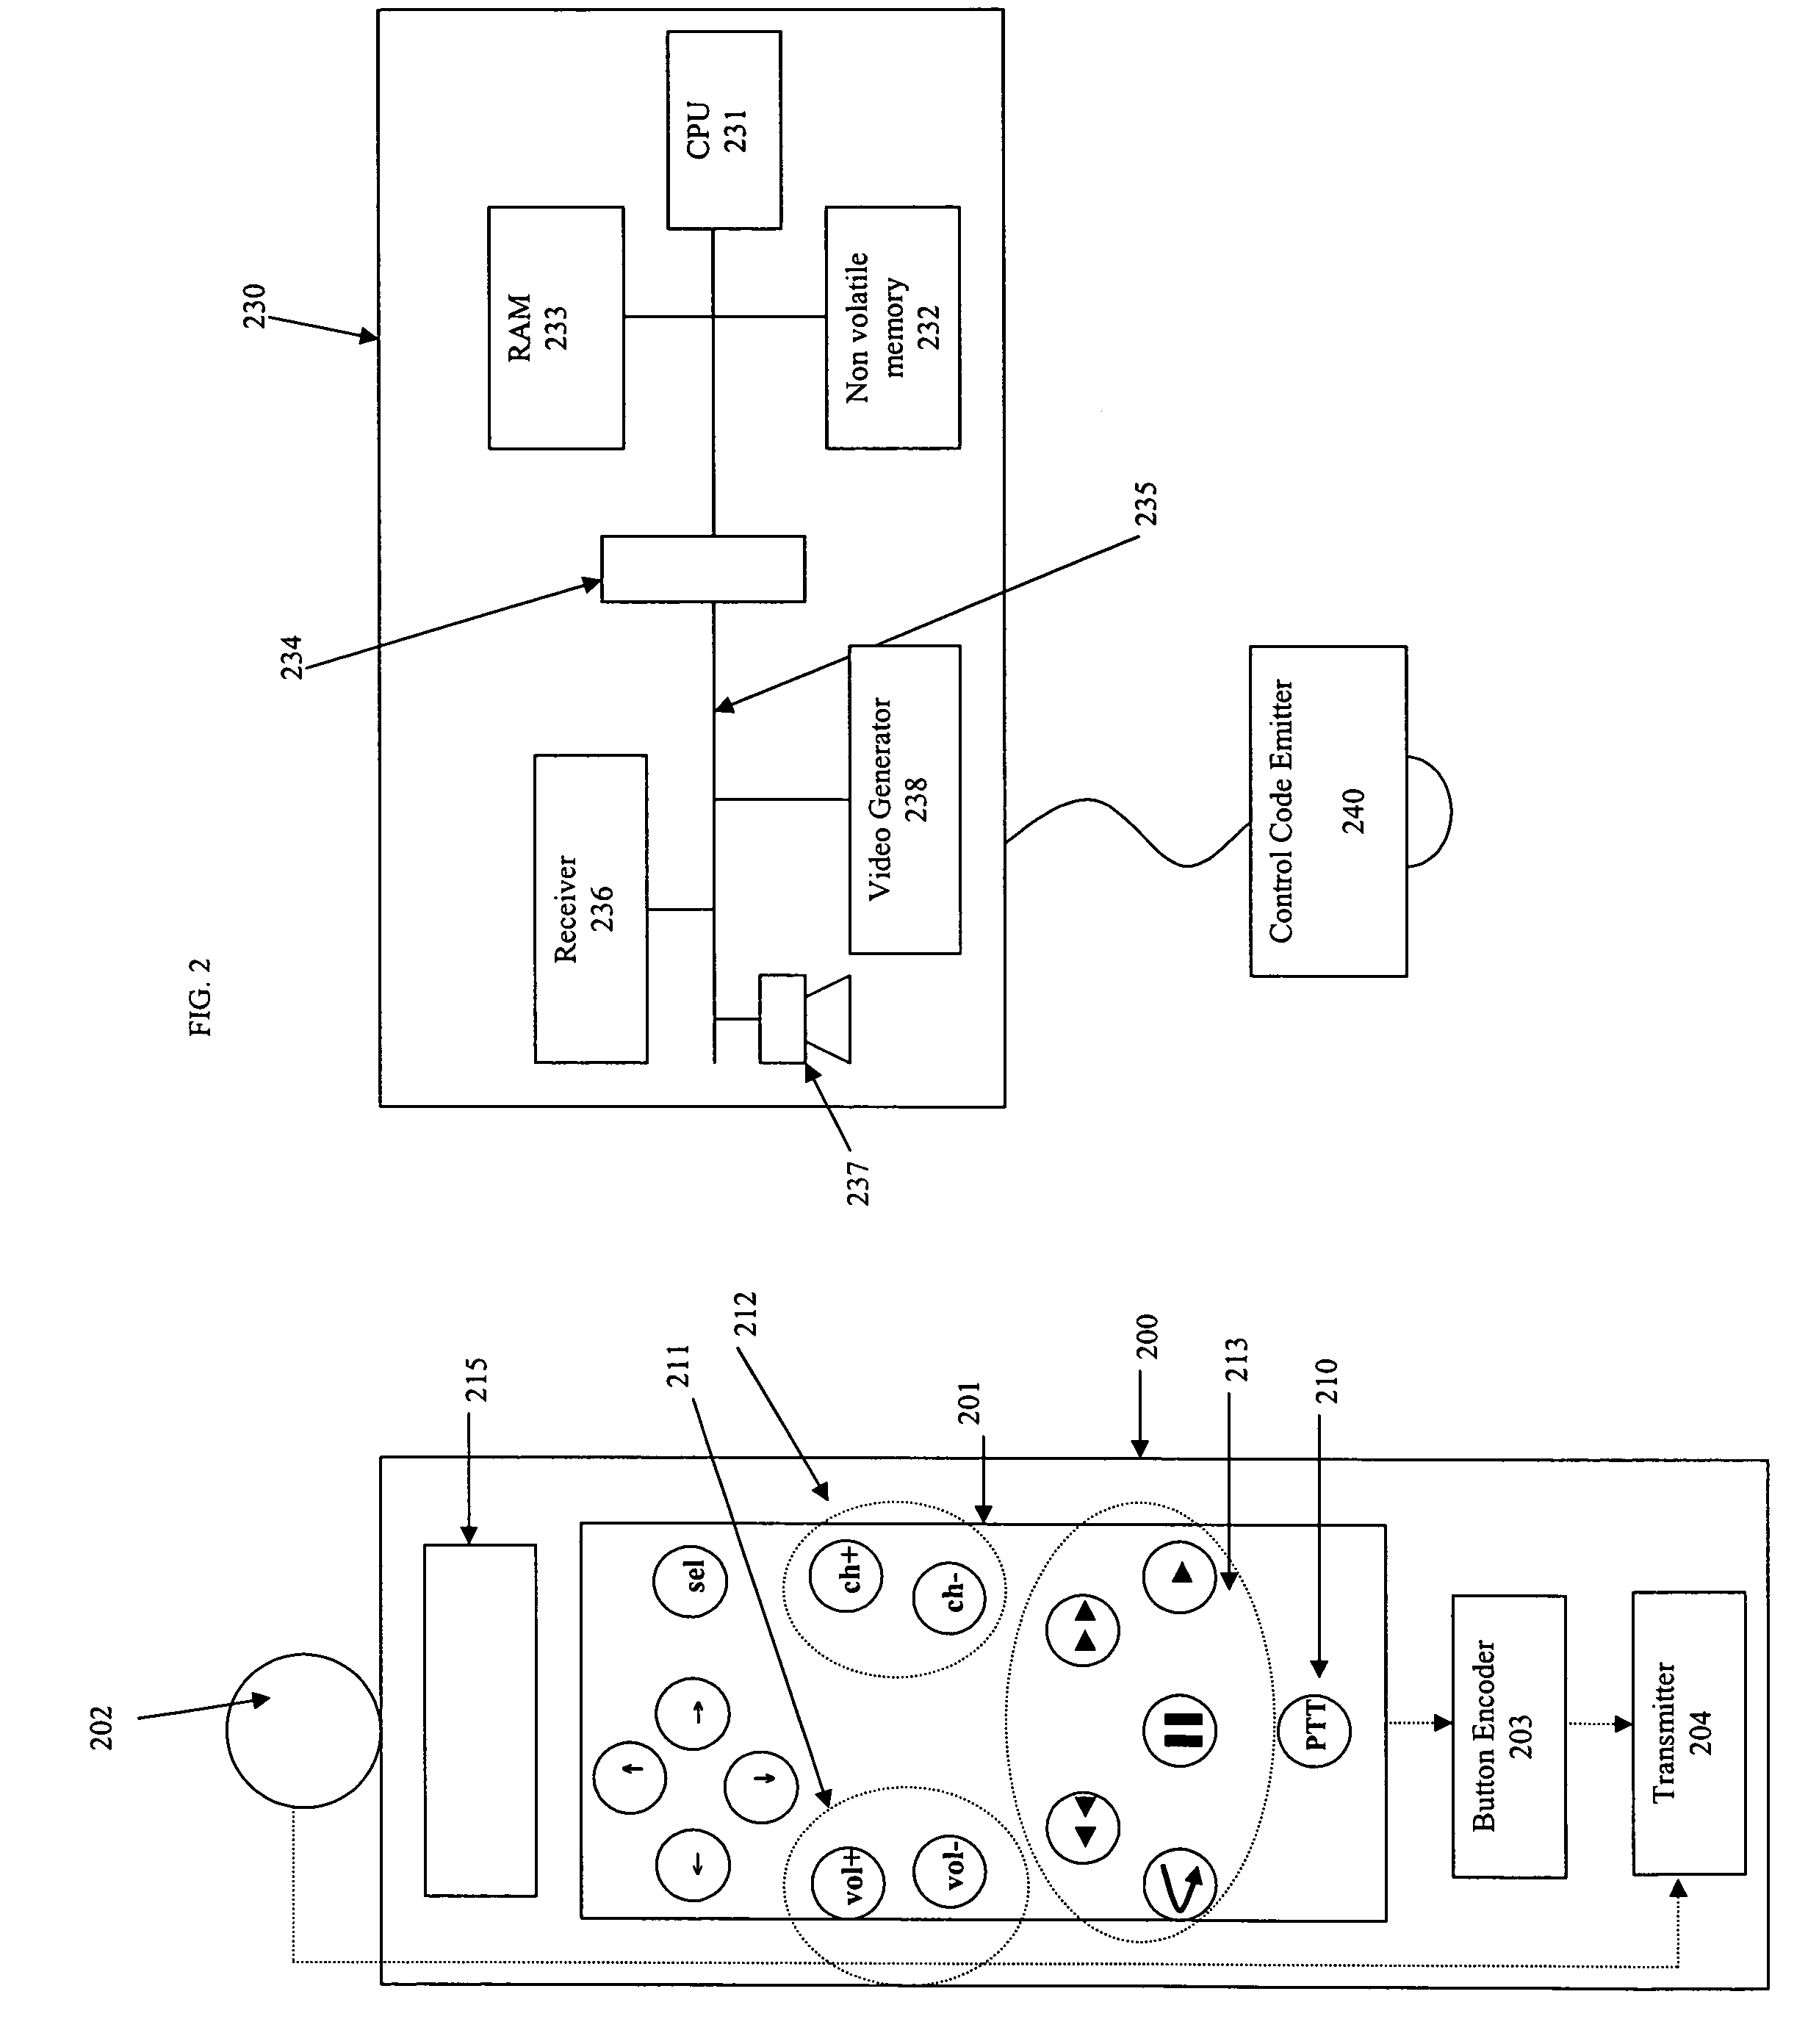 Activity-based control of a set of electronic devices